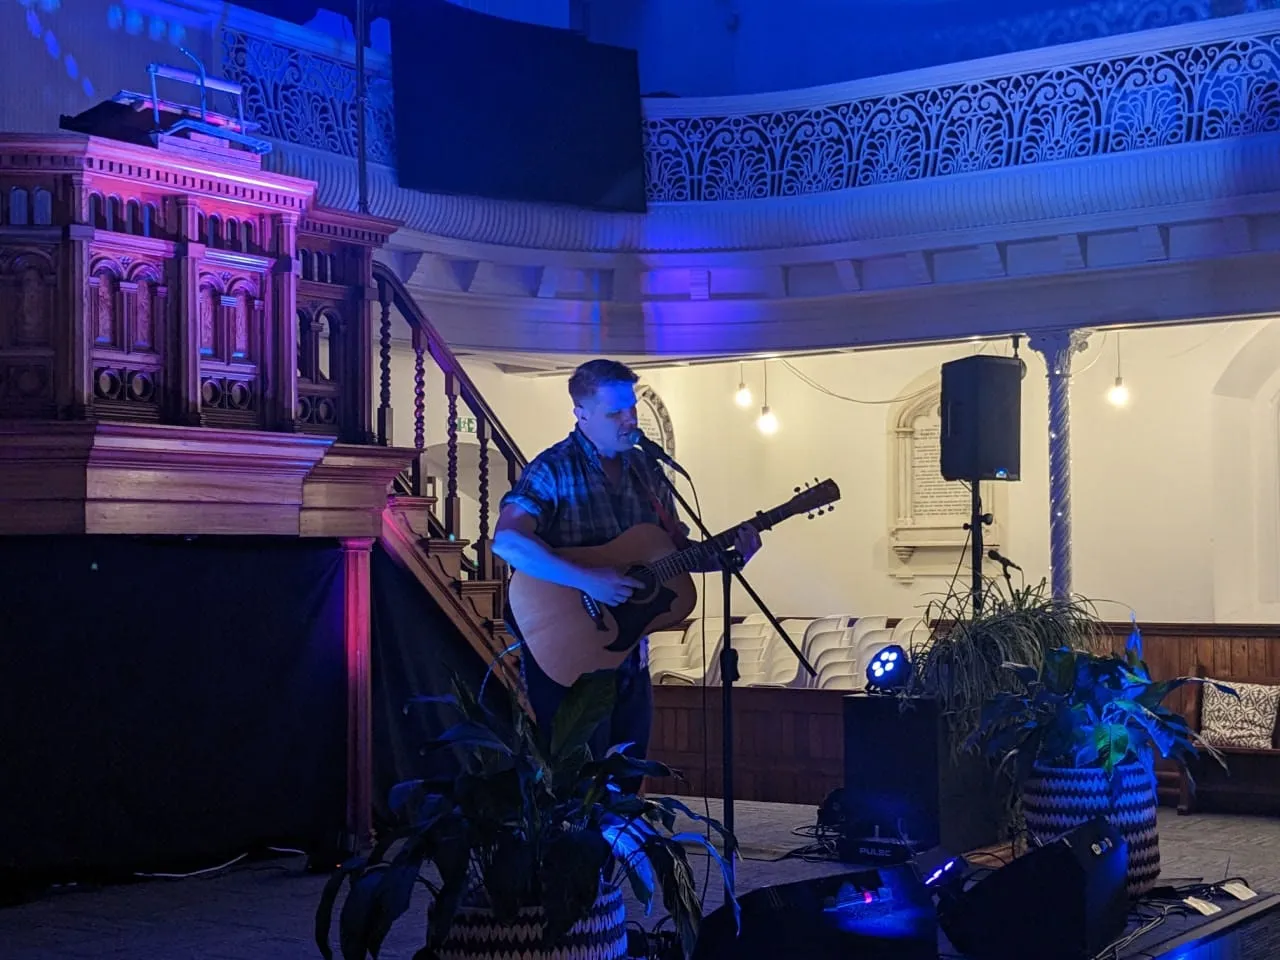 A man playing guitar in a church with blue lighting. Adam singing a live gig.